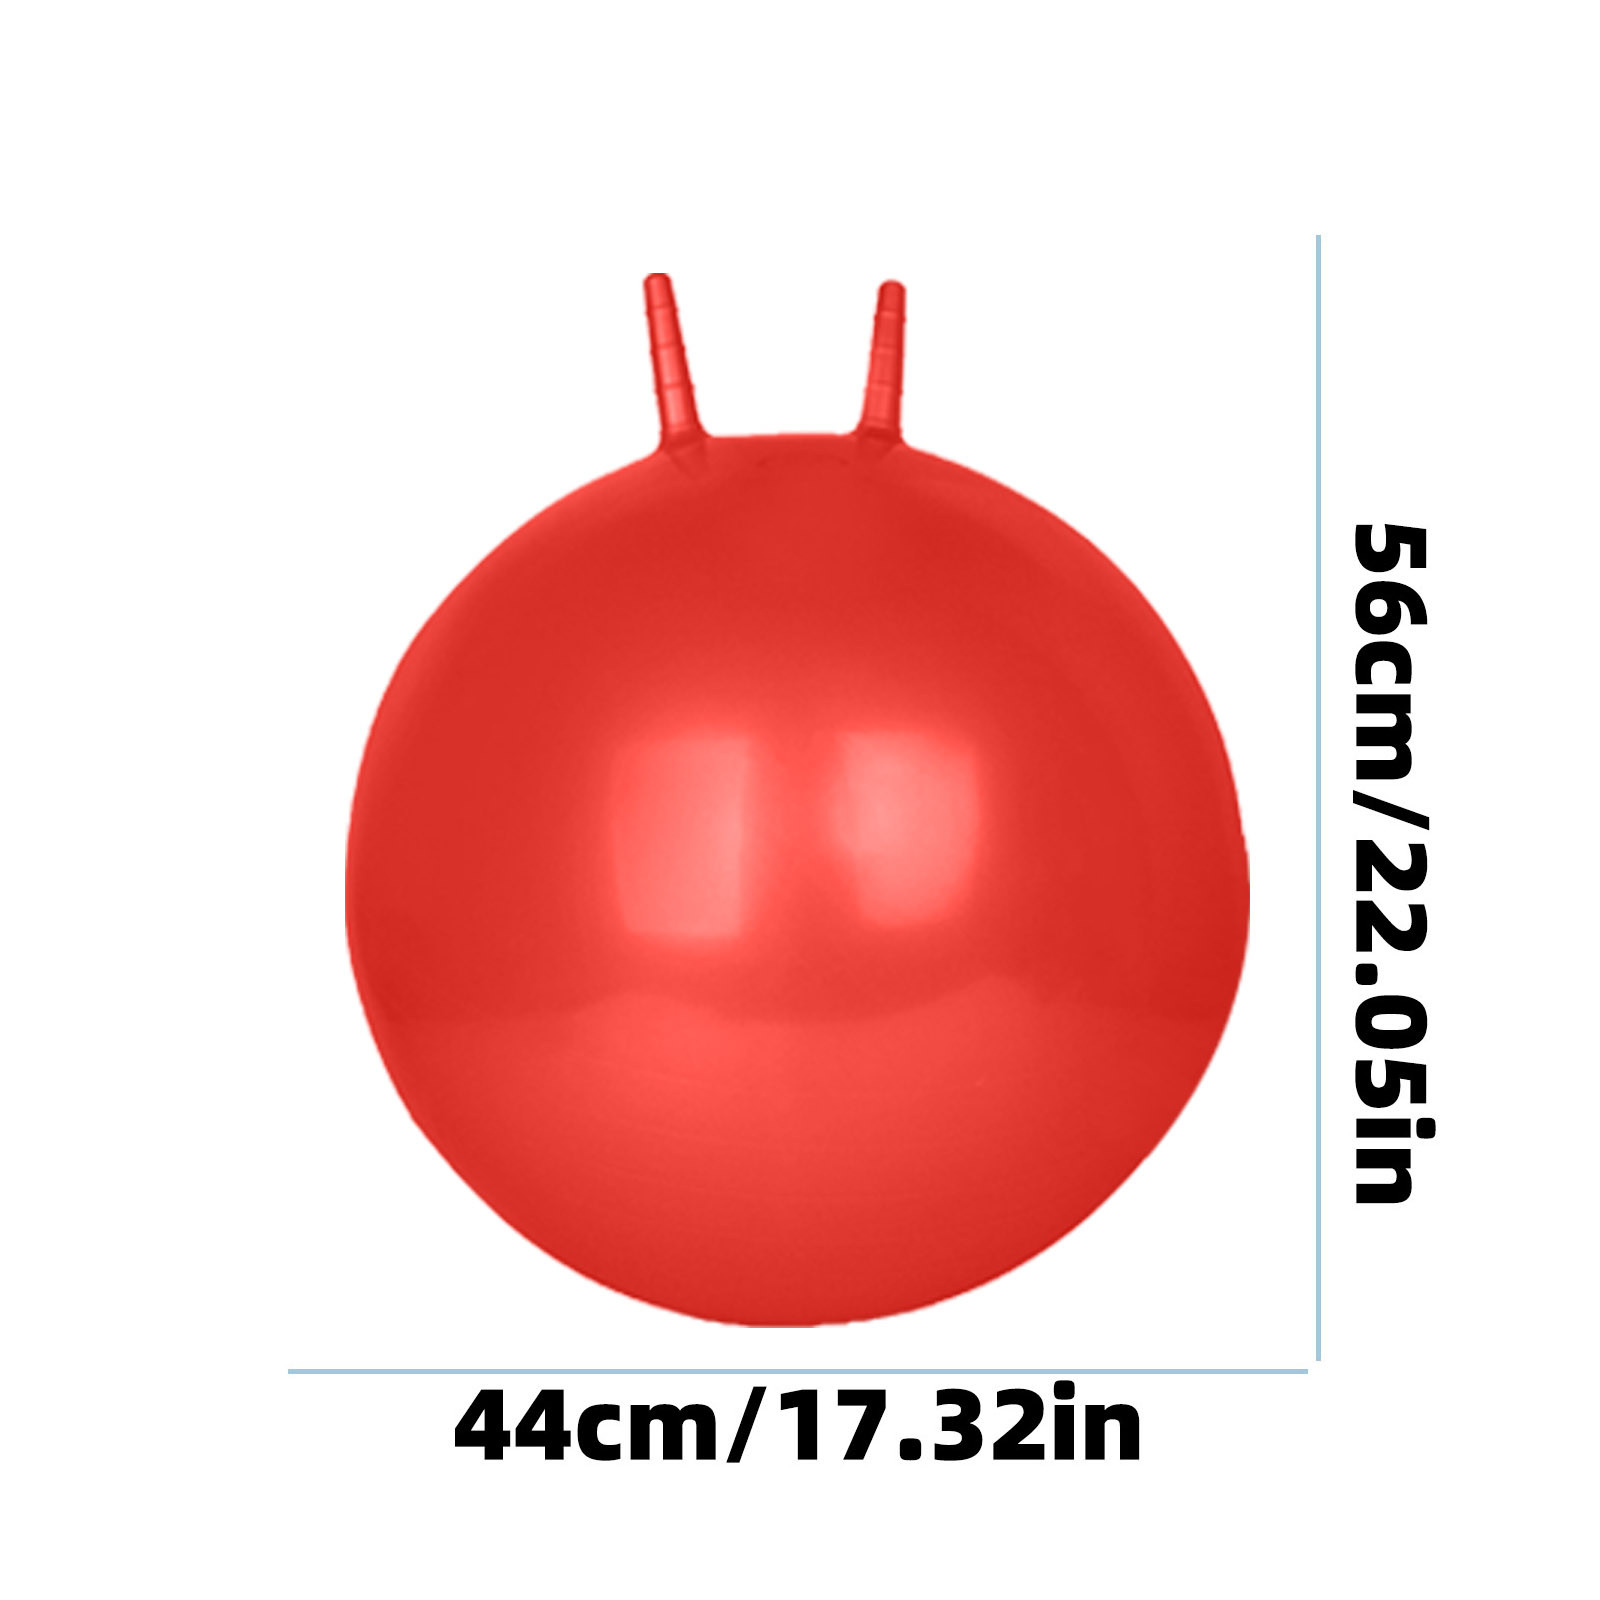 LARGE EXERCISE RETRO SPACE HOPPER PLAY BALL TOY KIDS ADULT GAME BOUNCING BALL - image 2 of 2